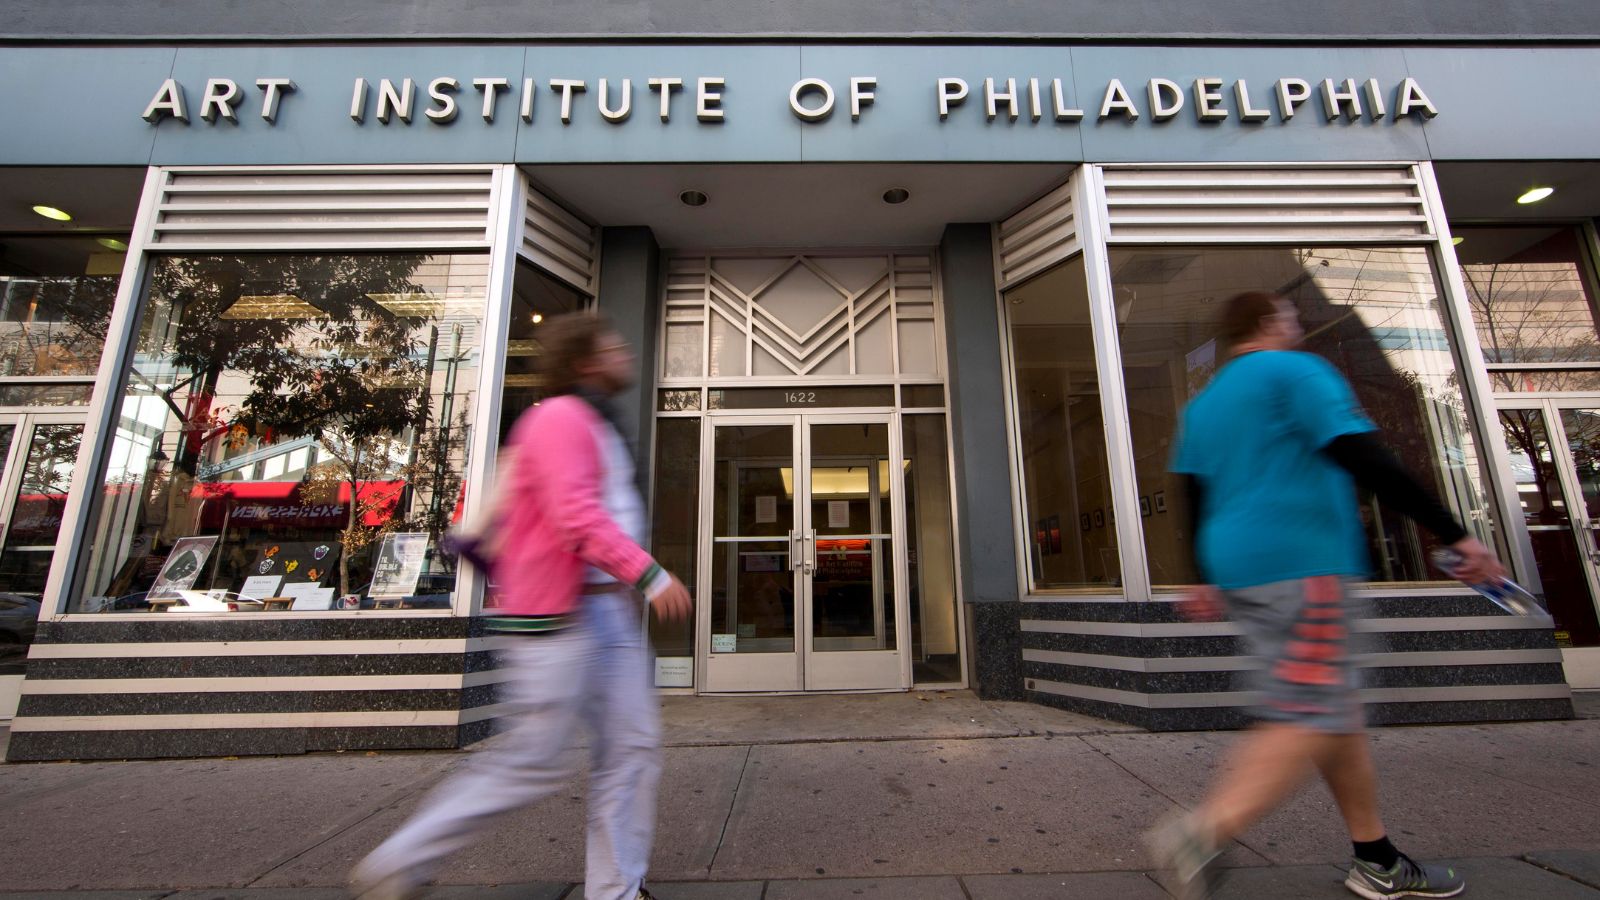 Former students of for-profit art institutes to see cancelled loans...